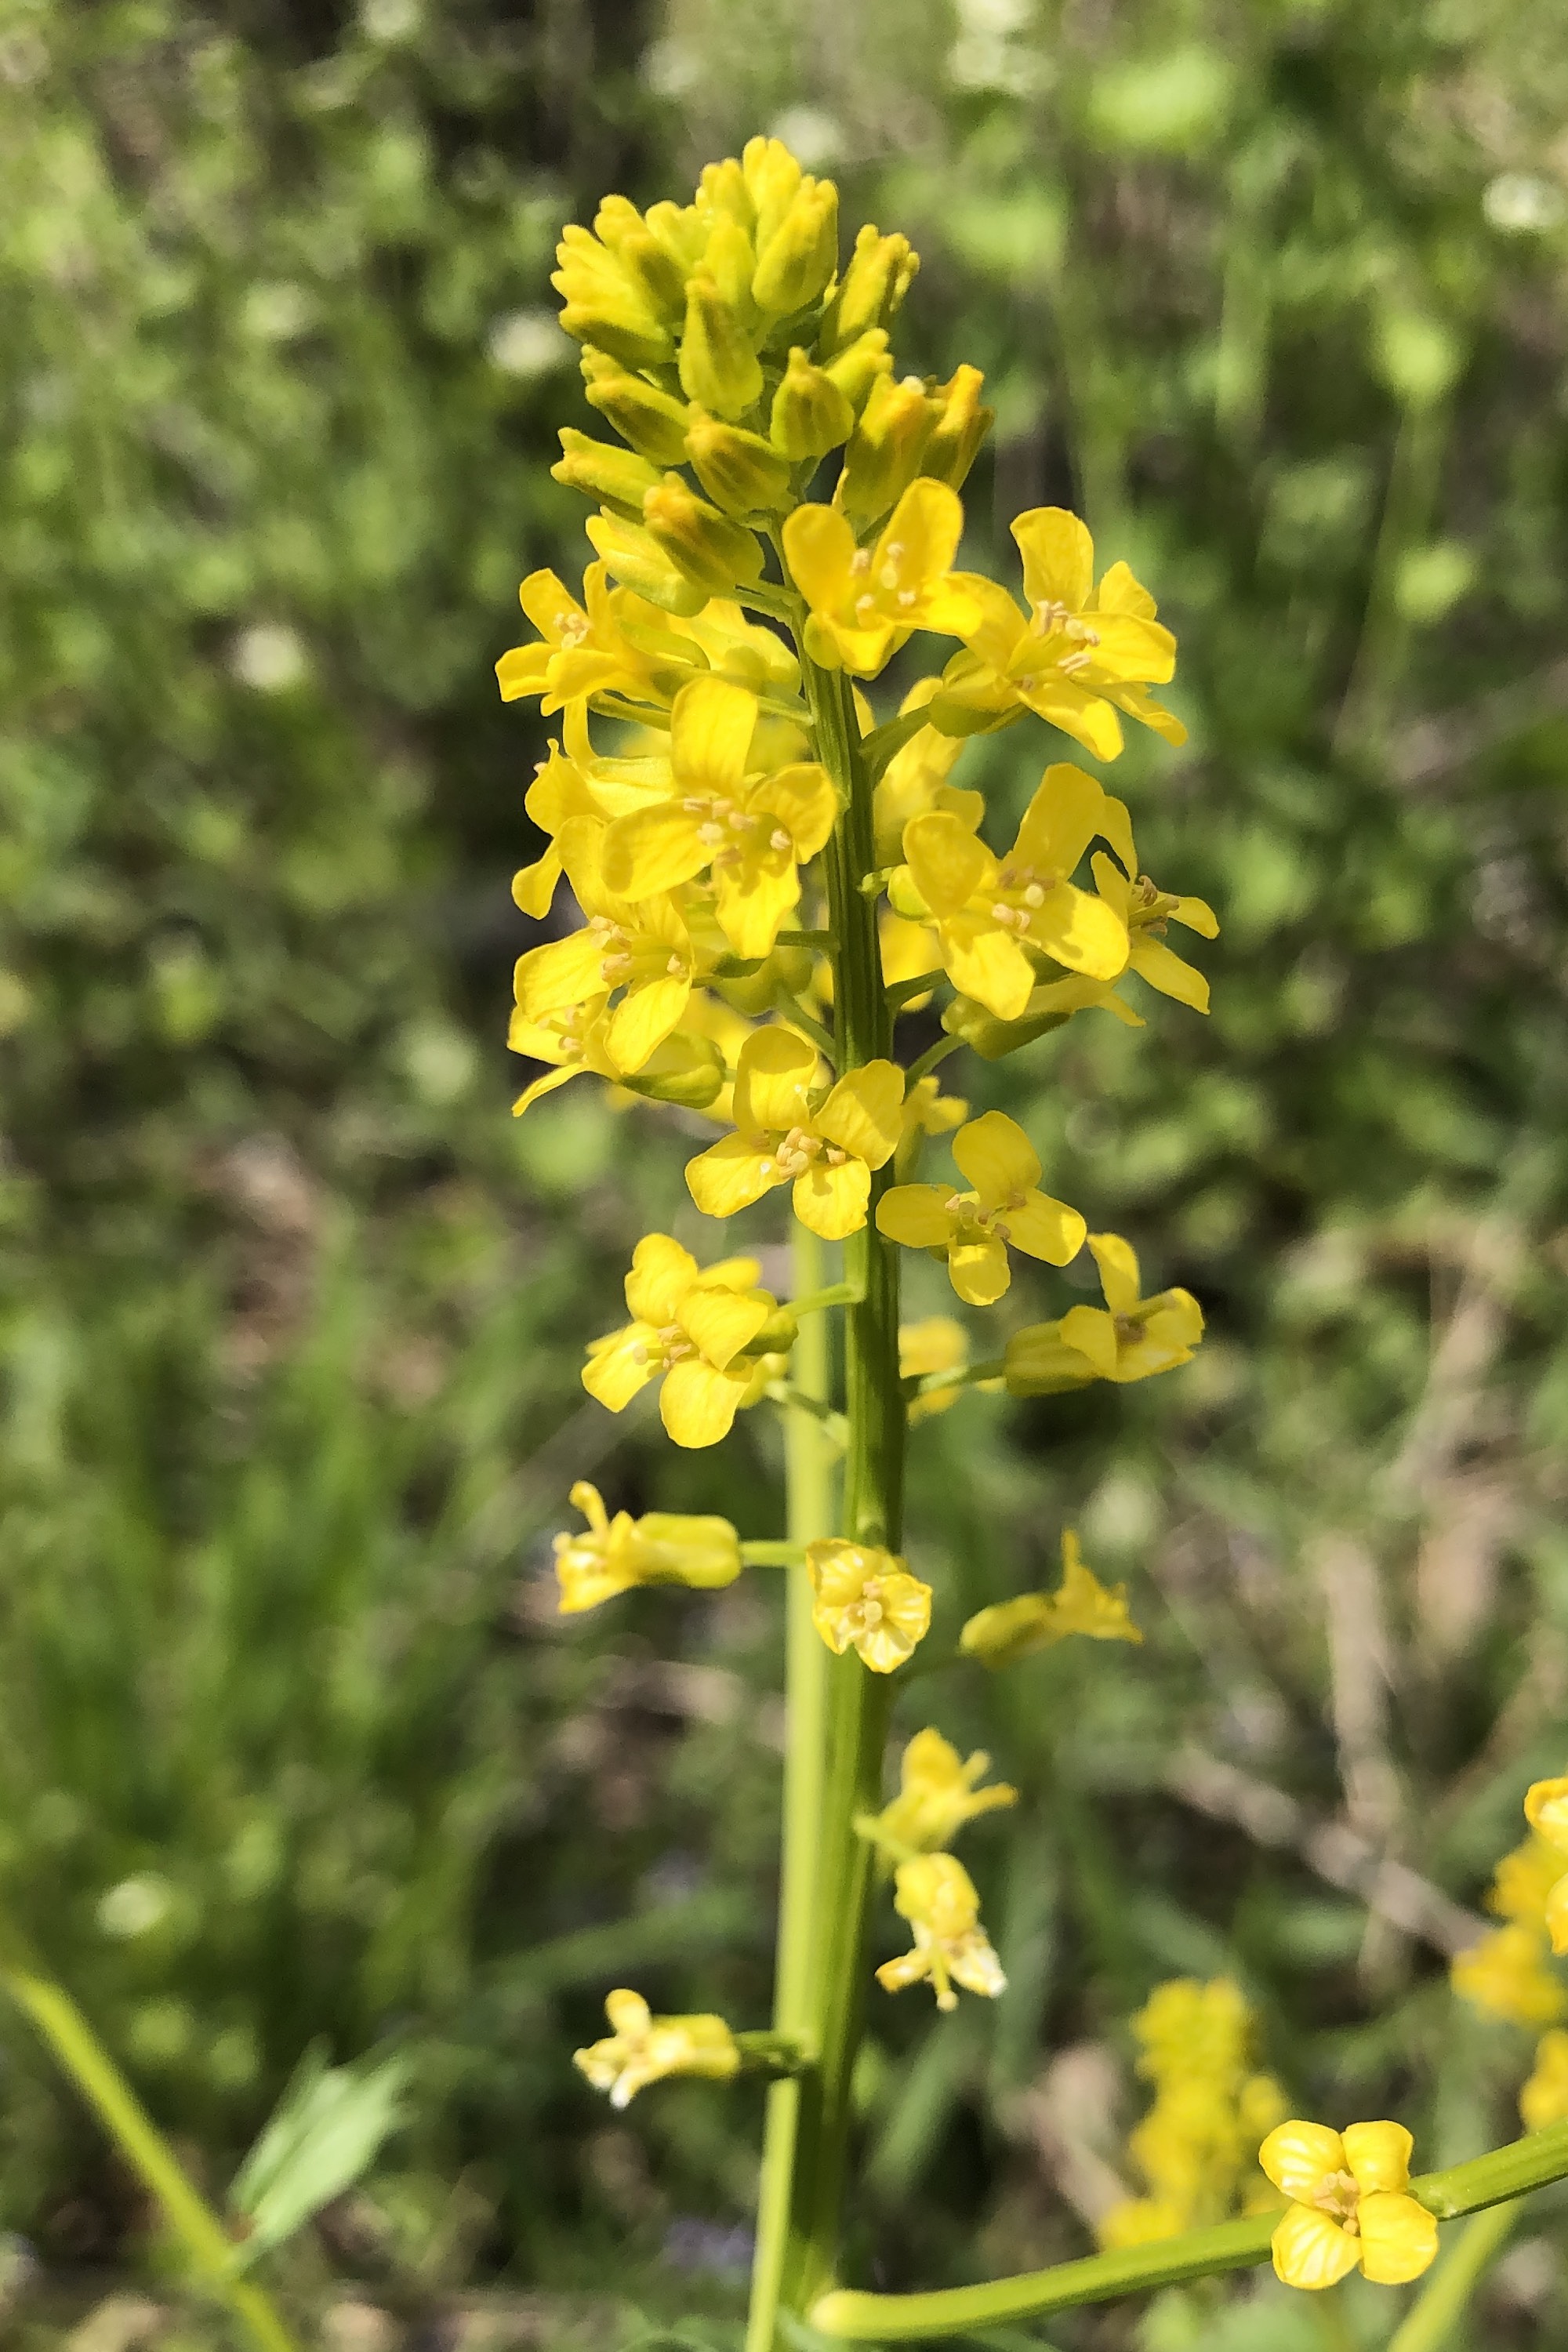 Garden Yellow Rocket in woods between Marion Dunn and Oak Savanna in Madison, Wisconsin on May 9, 2020.